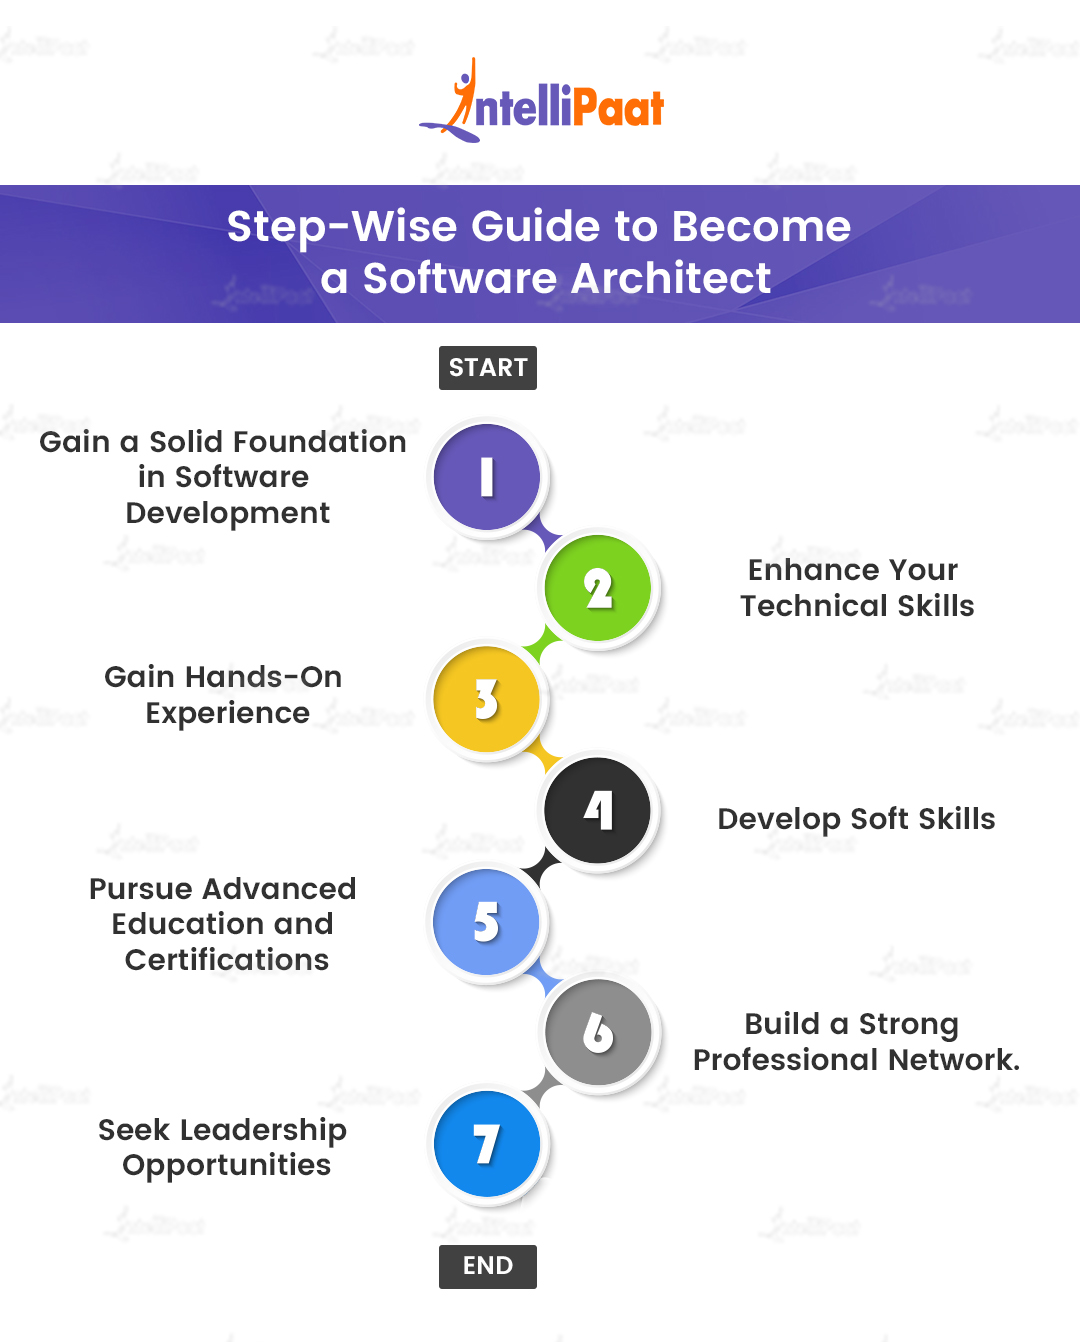 Step-Wise Guide to Become a Software Architect